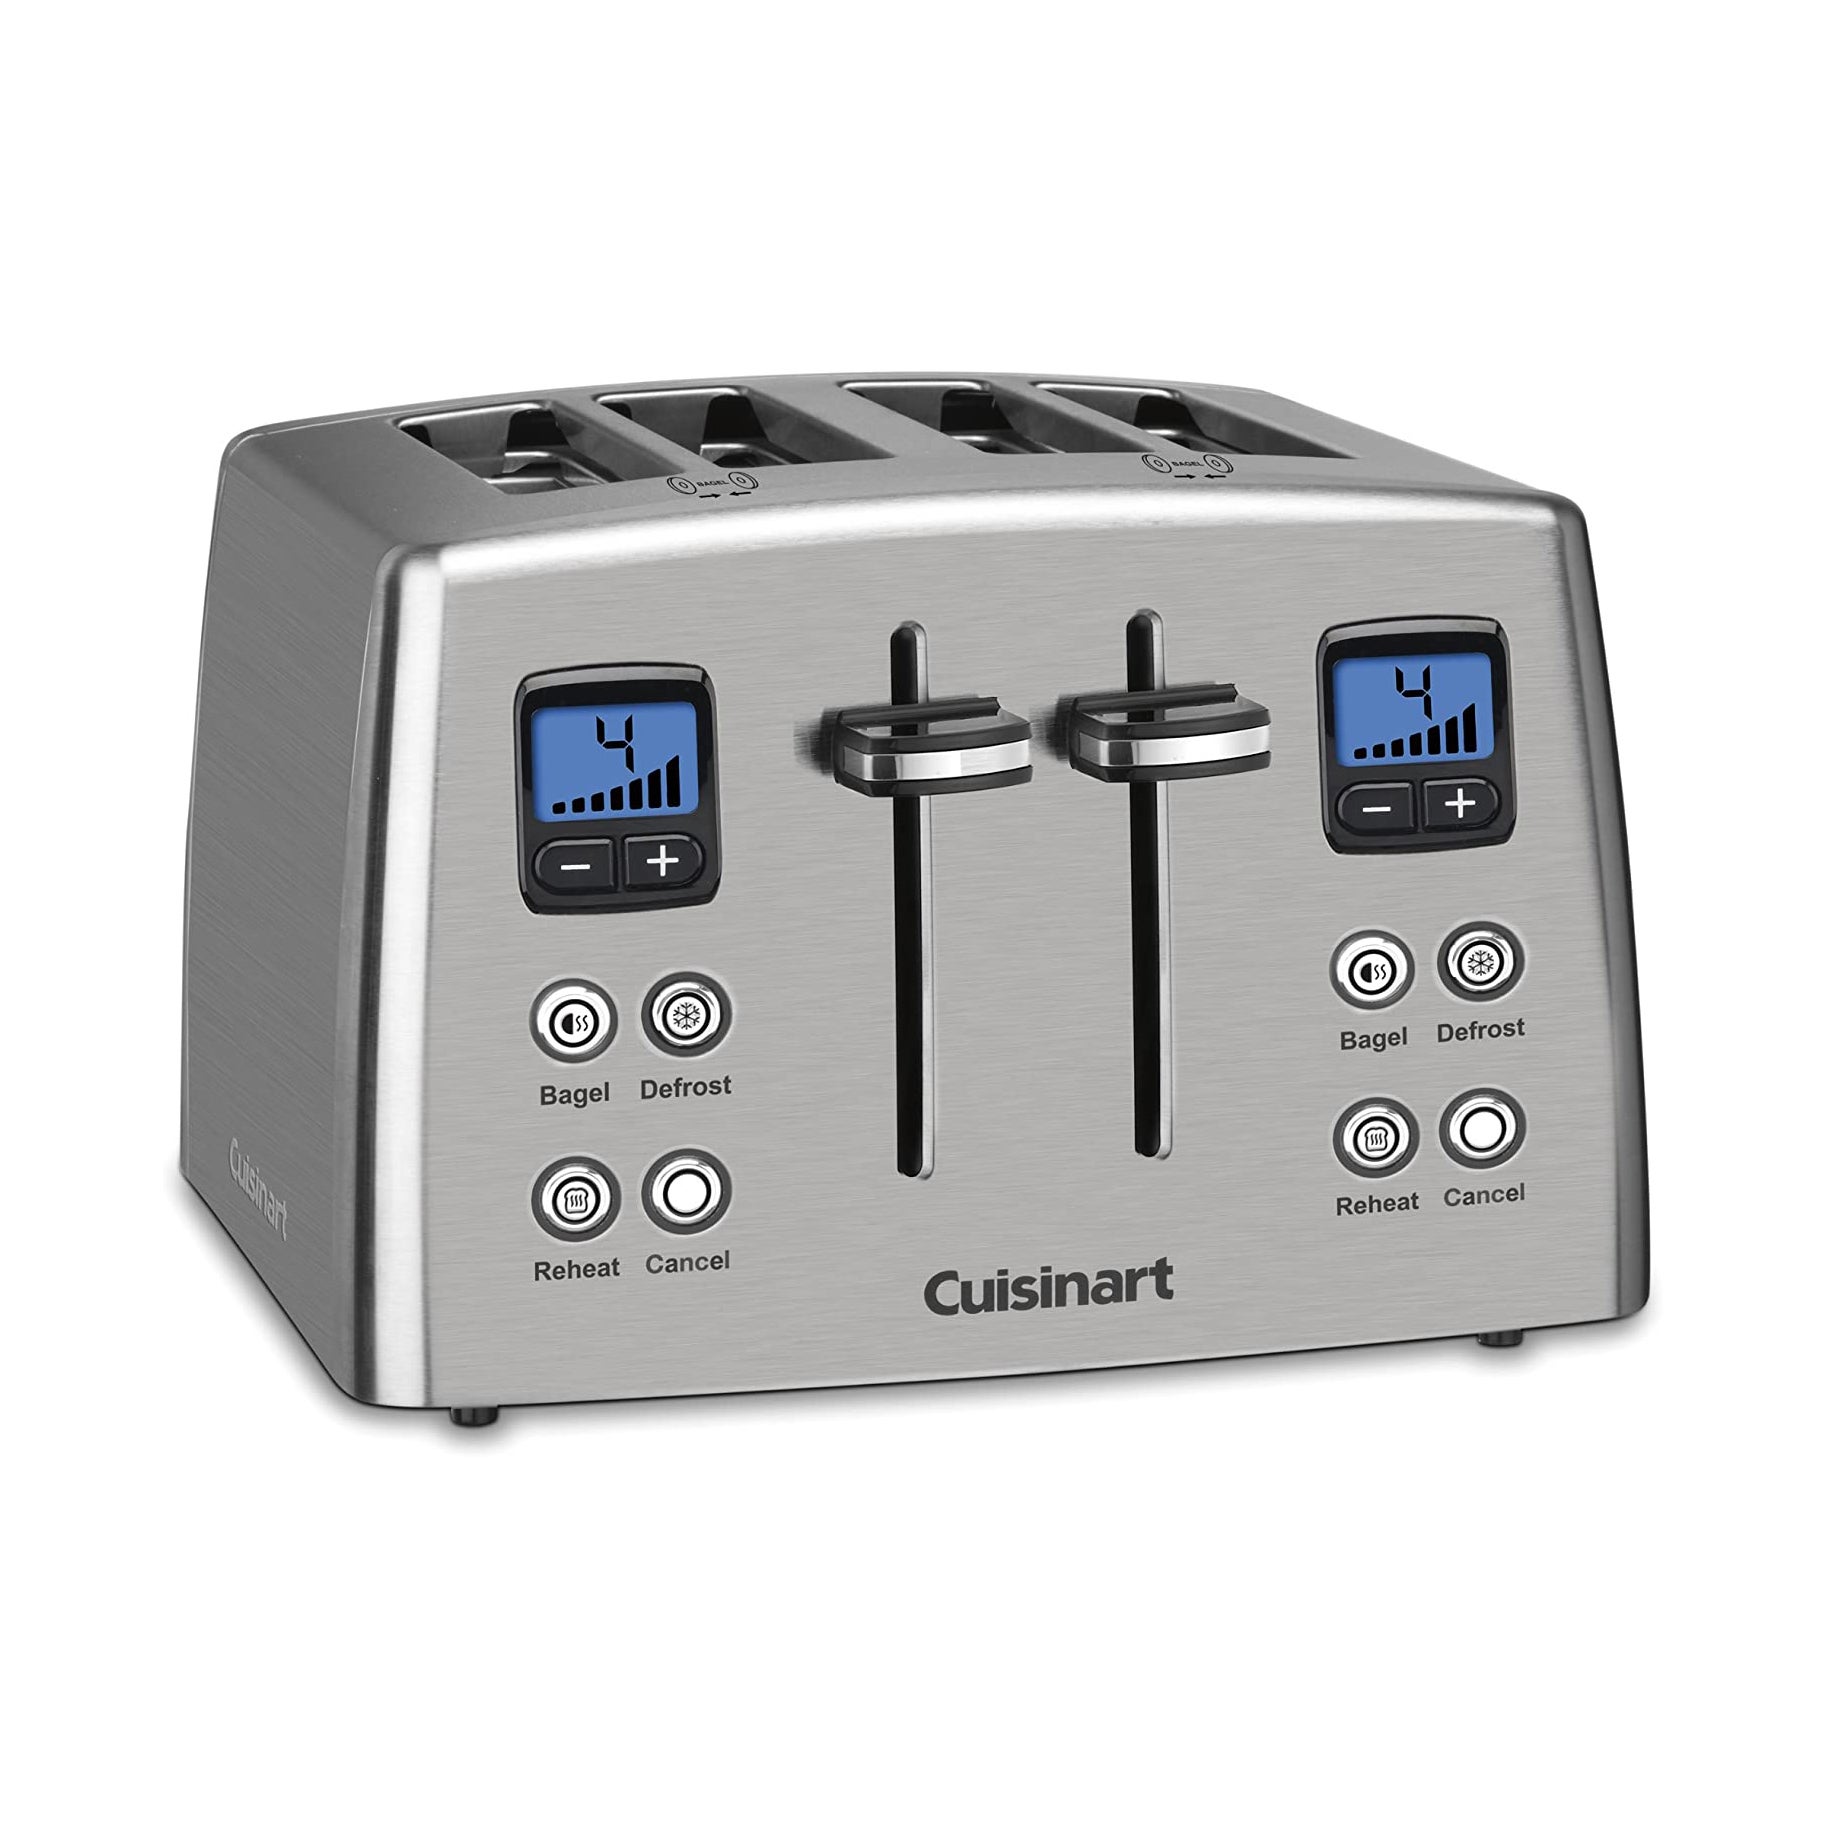 The Best Four Slice Toasters Option: Cuisinart Countdown Four Slice Toaster